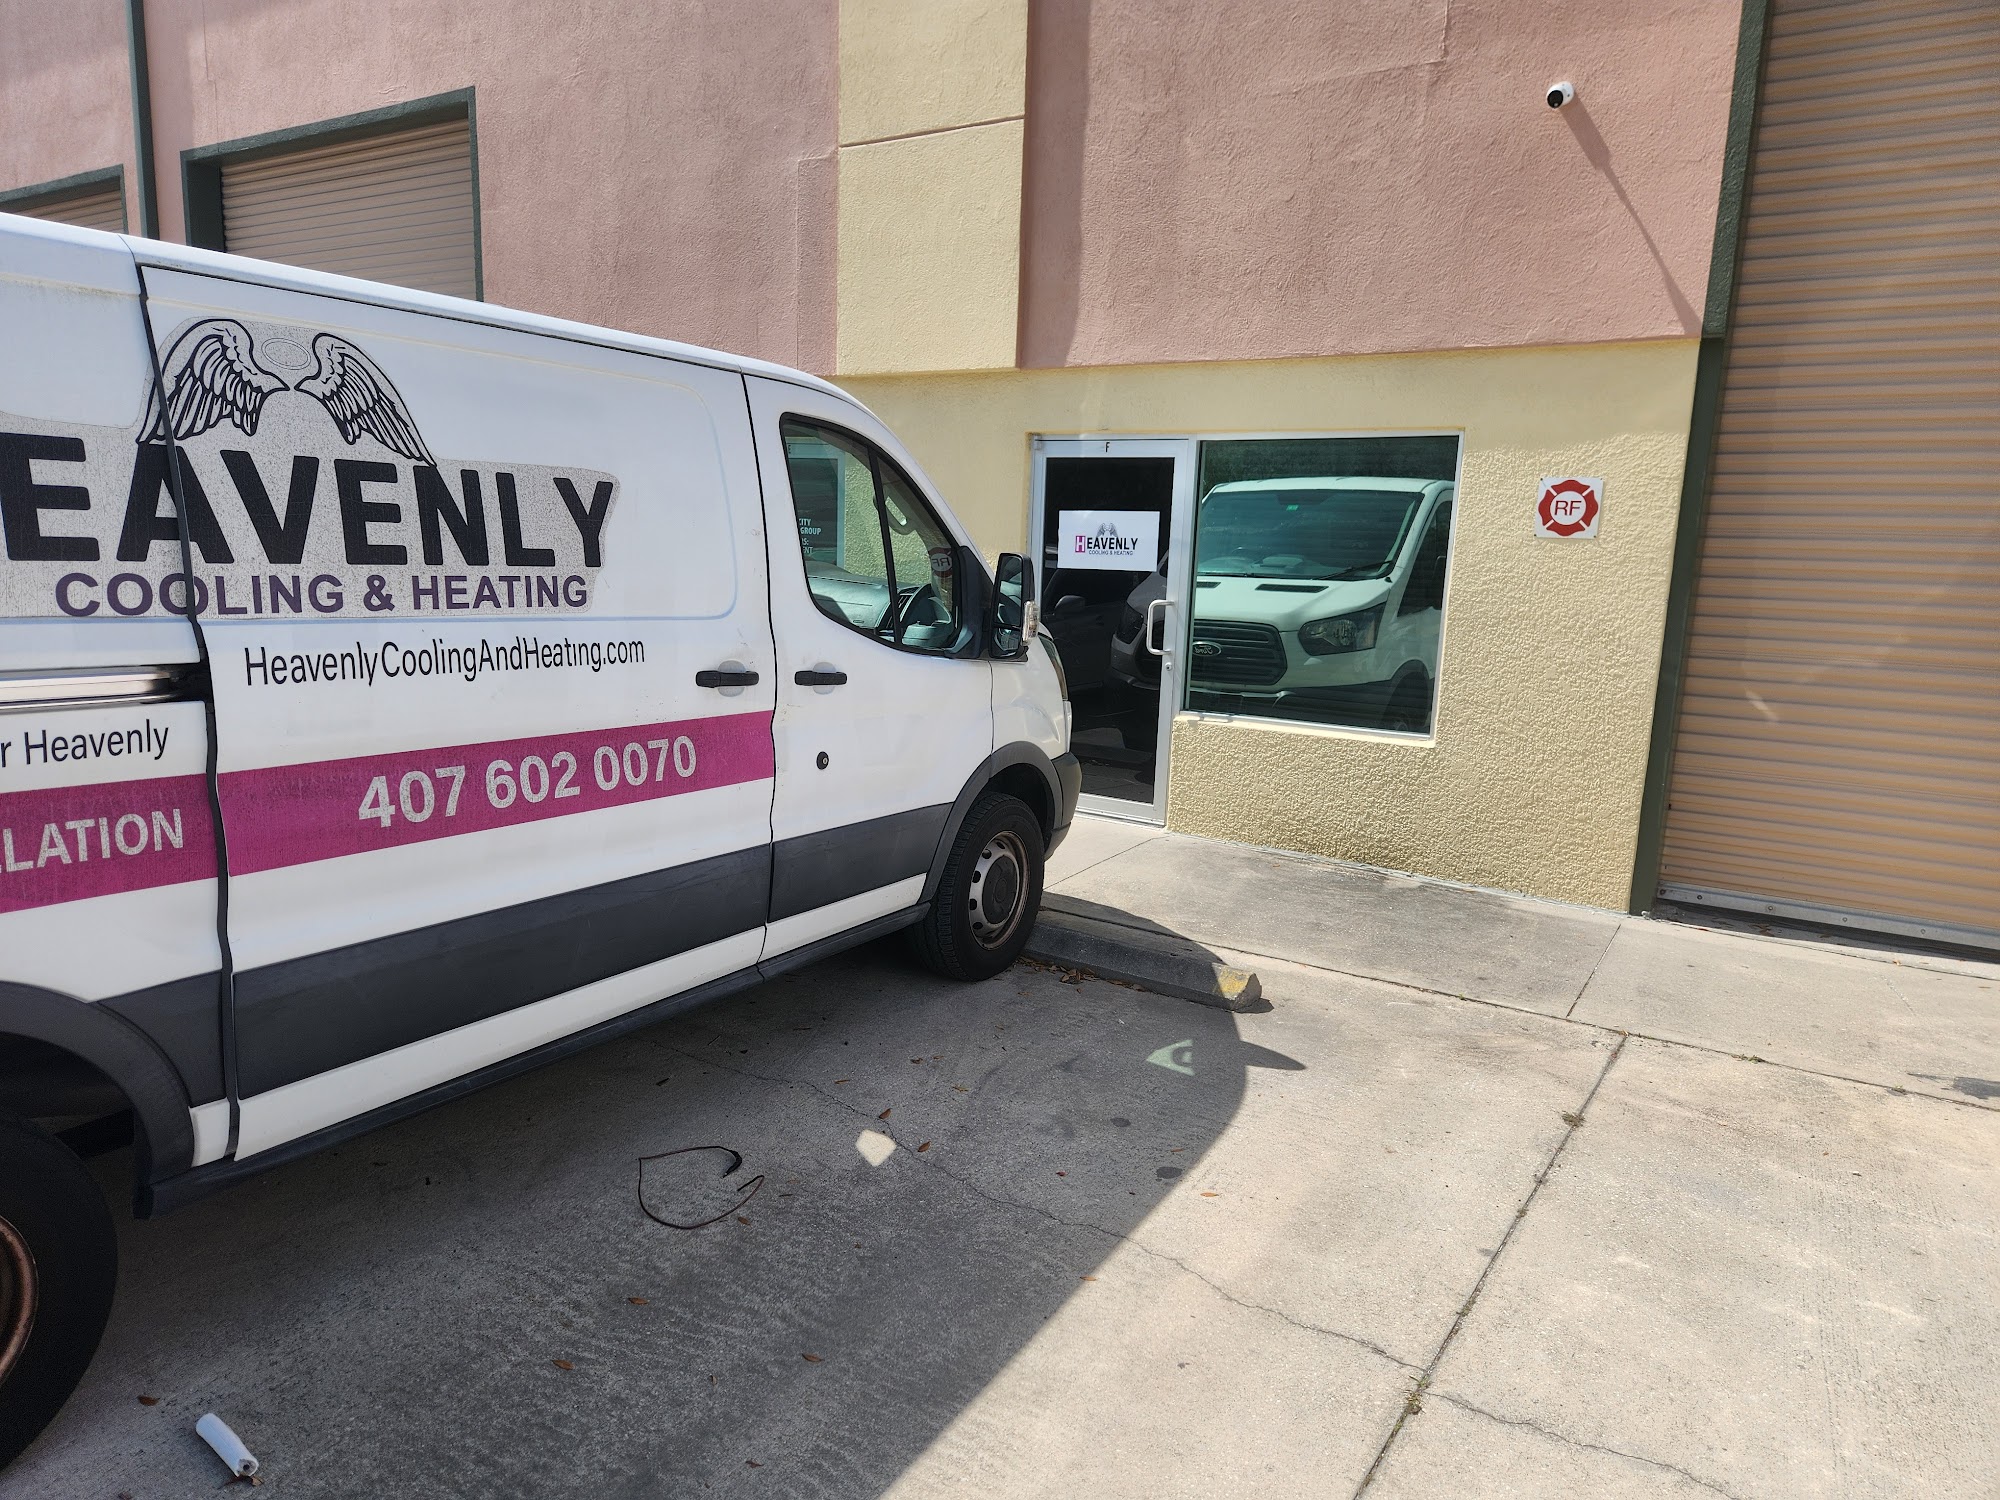 Heavenly Cooling and Heating LLC